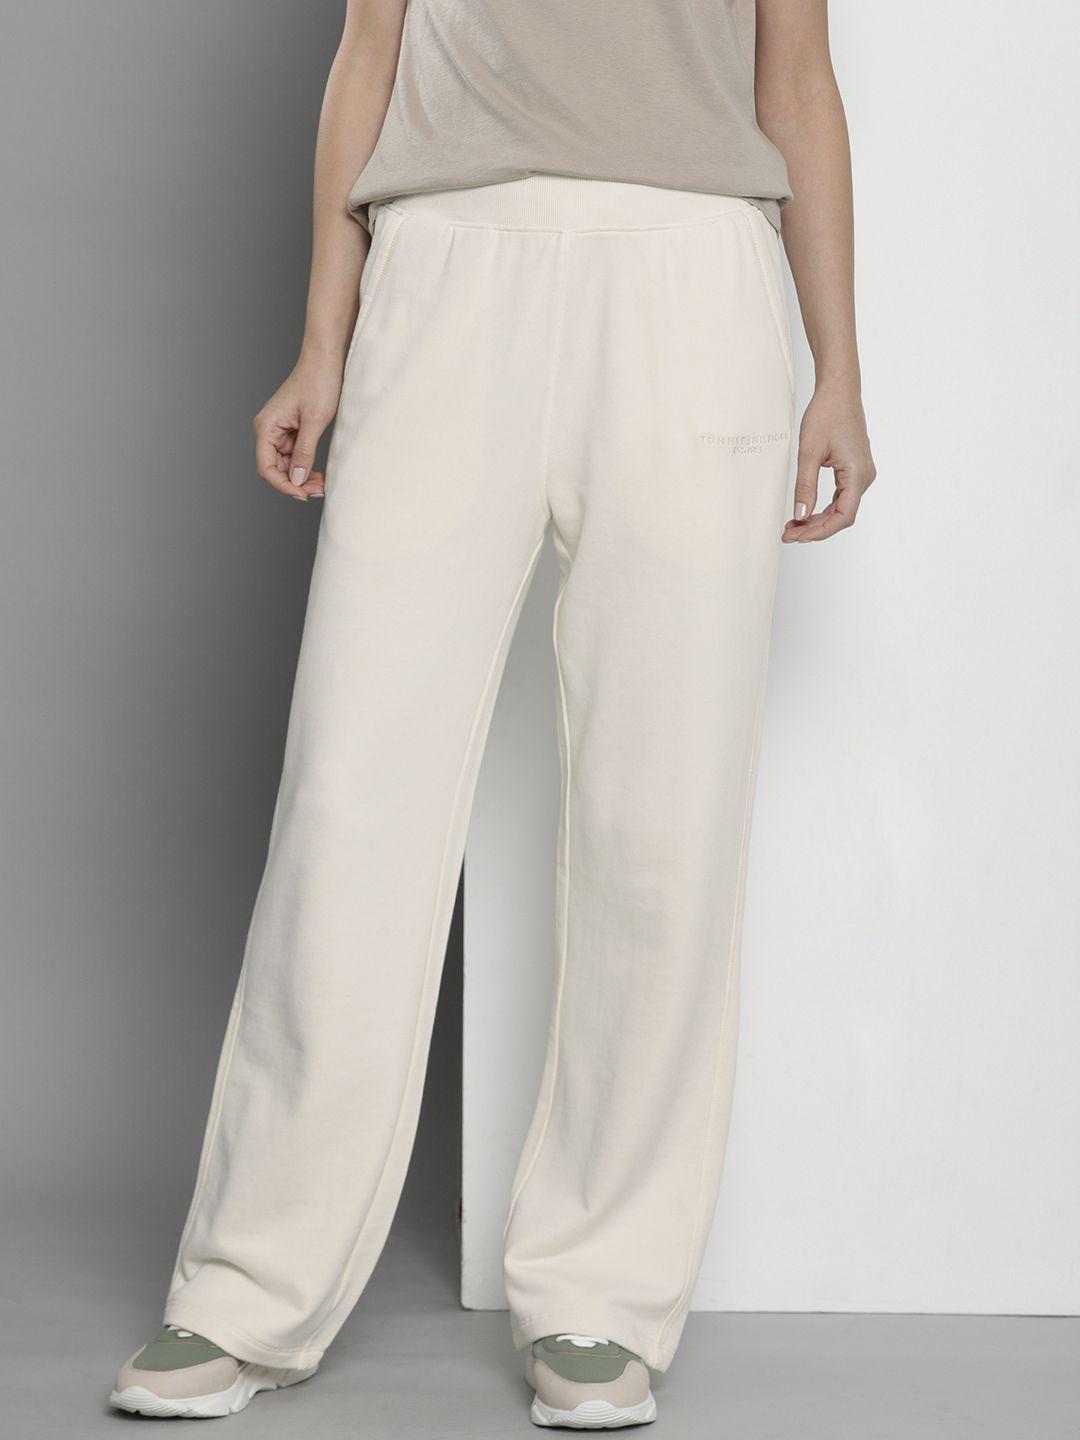 tommy hilfiger women relaxed fit track pants